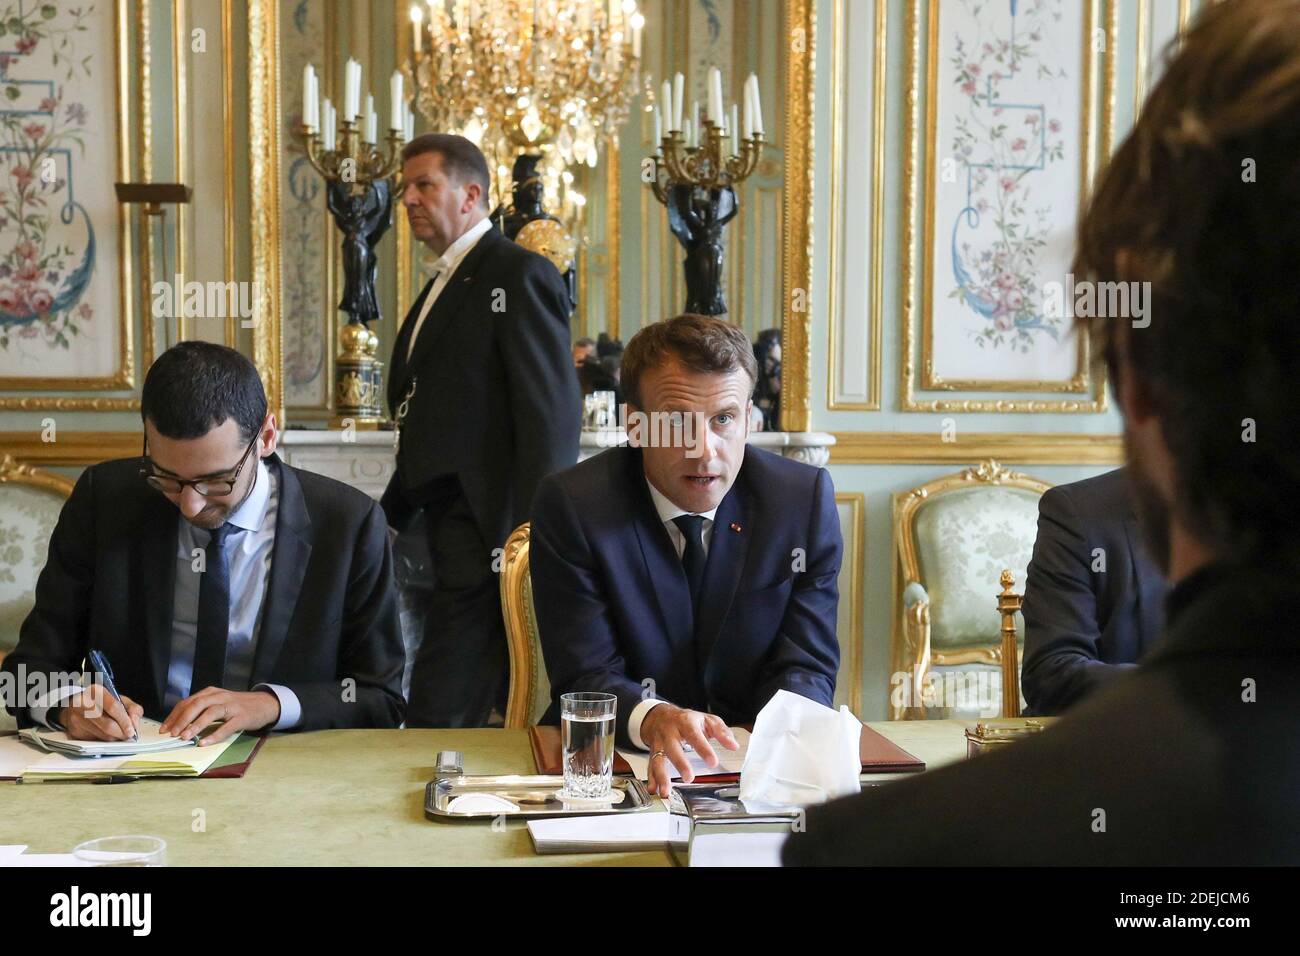 French president Emmanuel Macron meets with CEO of Twitter Jack Dorsey at  the Elysee Palace in Paris on June 7, 2019. Photo by Stephane  Lemouton/pool/ABACAPRESS.COM Stock Photo - Alamy